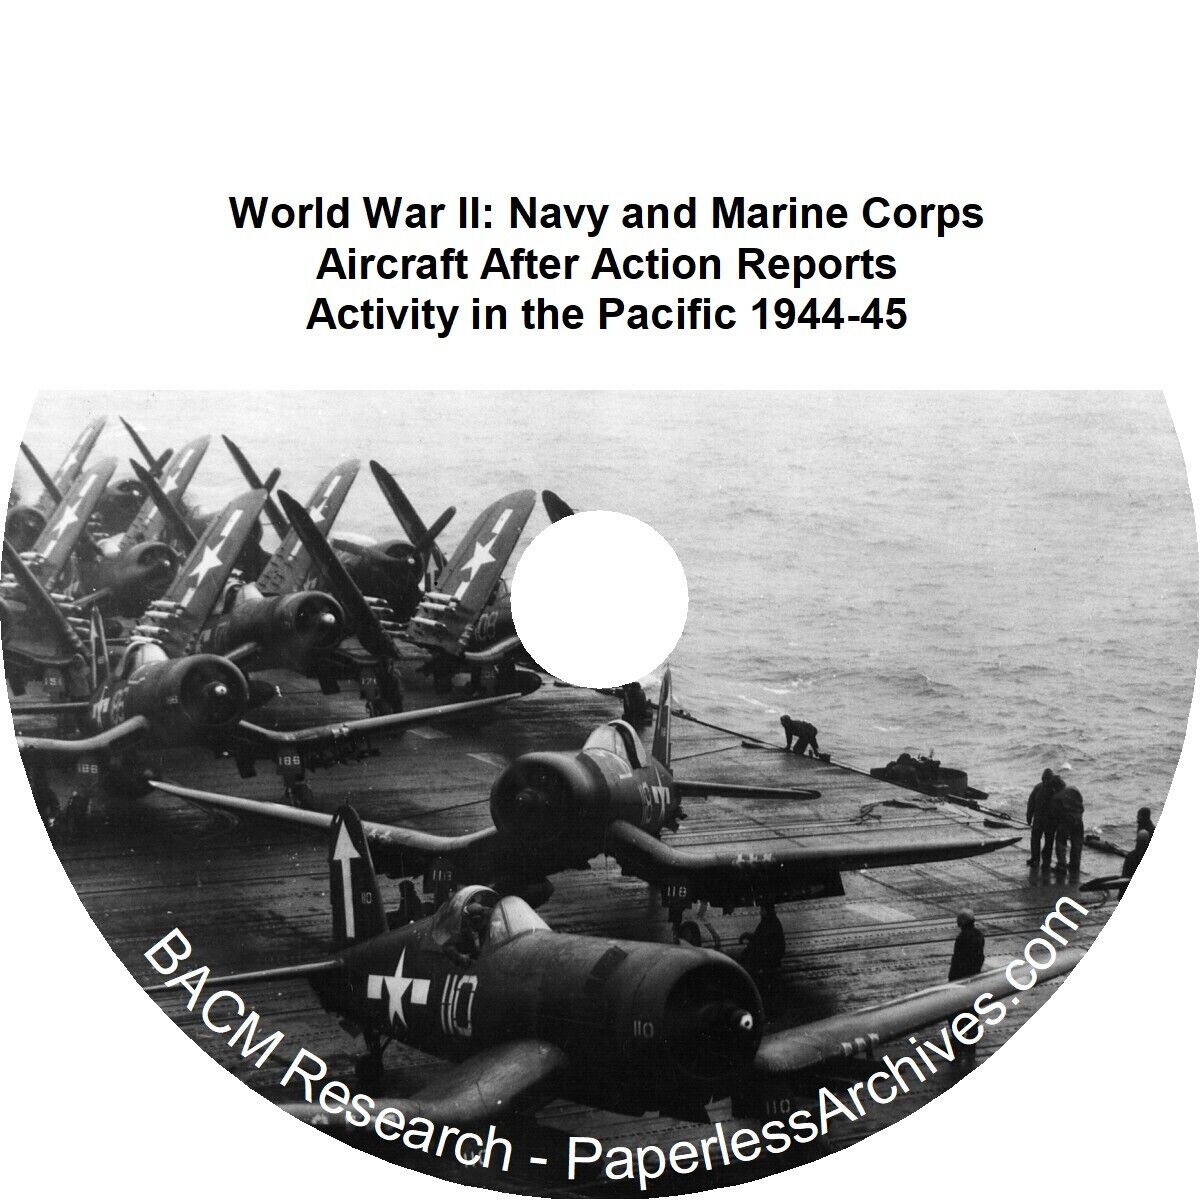 World War II: Navy and Marine Corps Aircraft After Action Reports of Activity